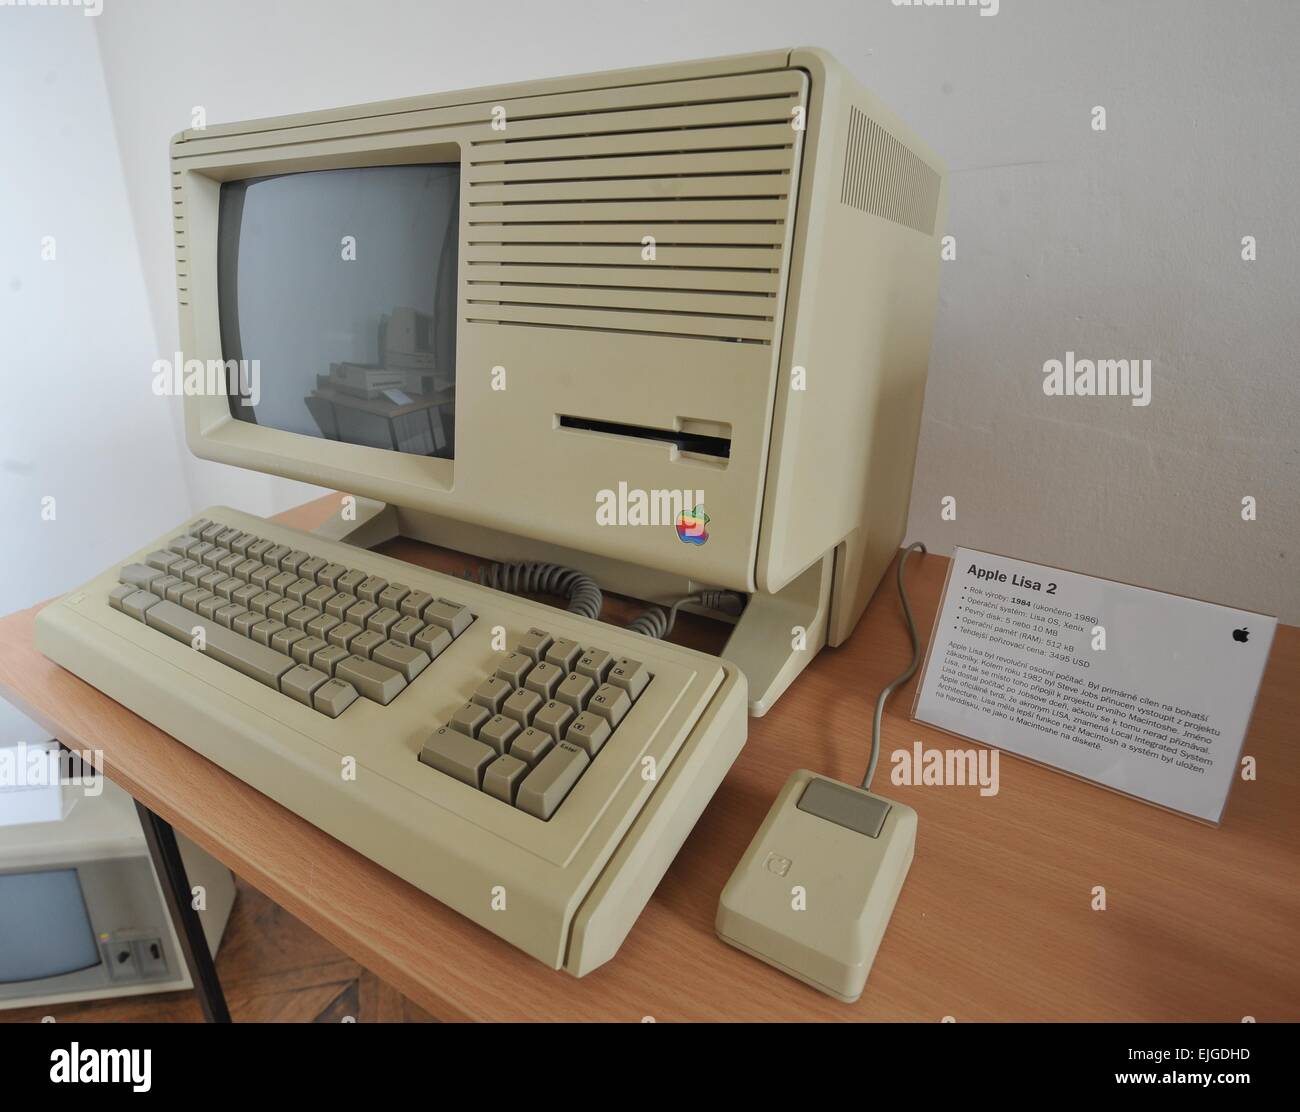 Start of exhibition of historical computers of US firm Apple, including rare computers like Apple Lisa (pictured), first Macintosh, Power Mac G4 Cube took place in chateau Slavkov - Austerlitz, Slavkov u Brna, Czech Republic, March 26, 2015. (CTK Photo/Igor Zehl) Stock Photo